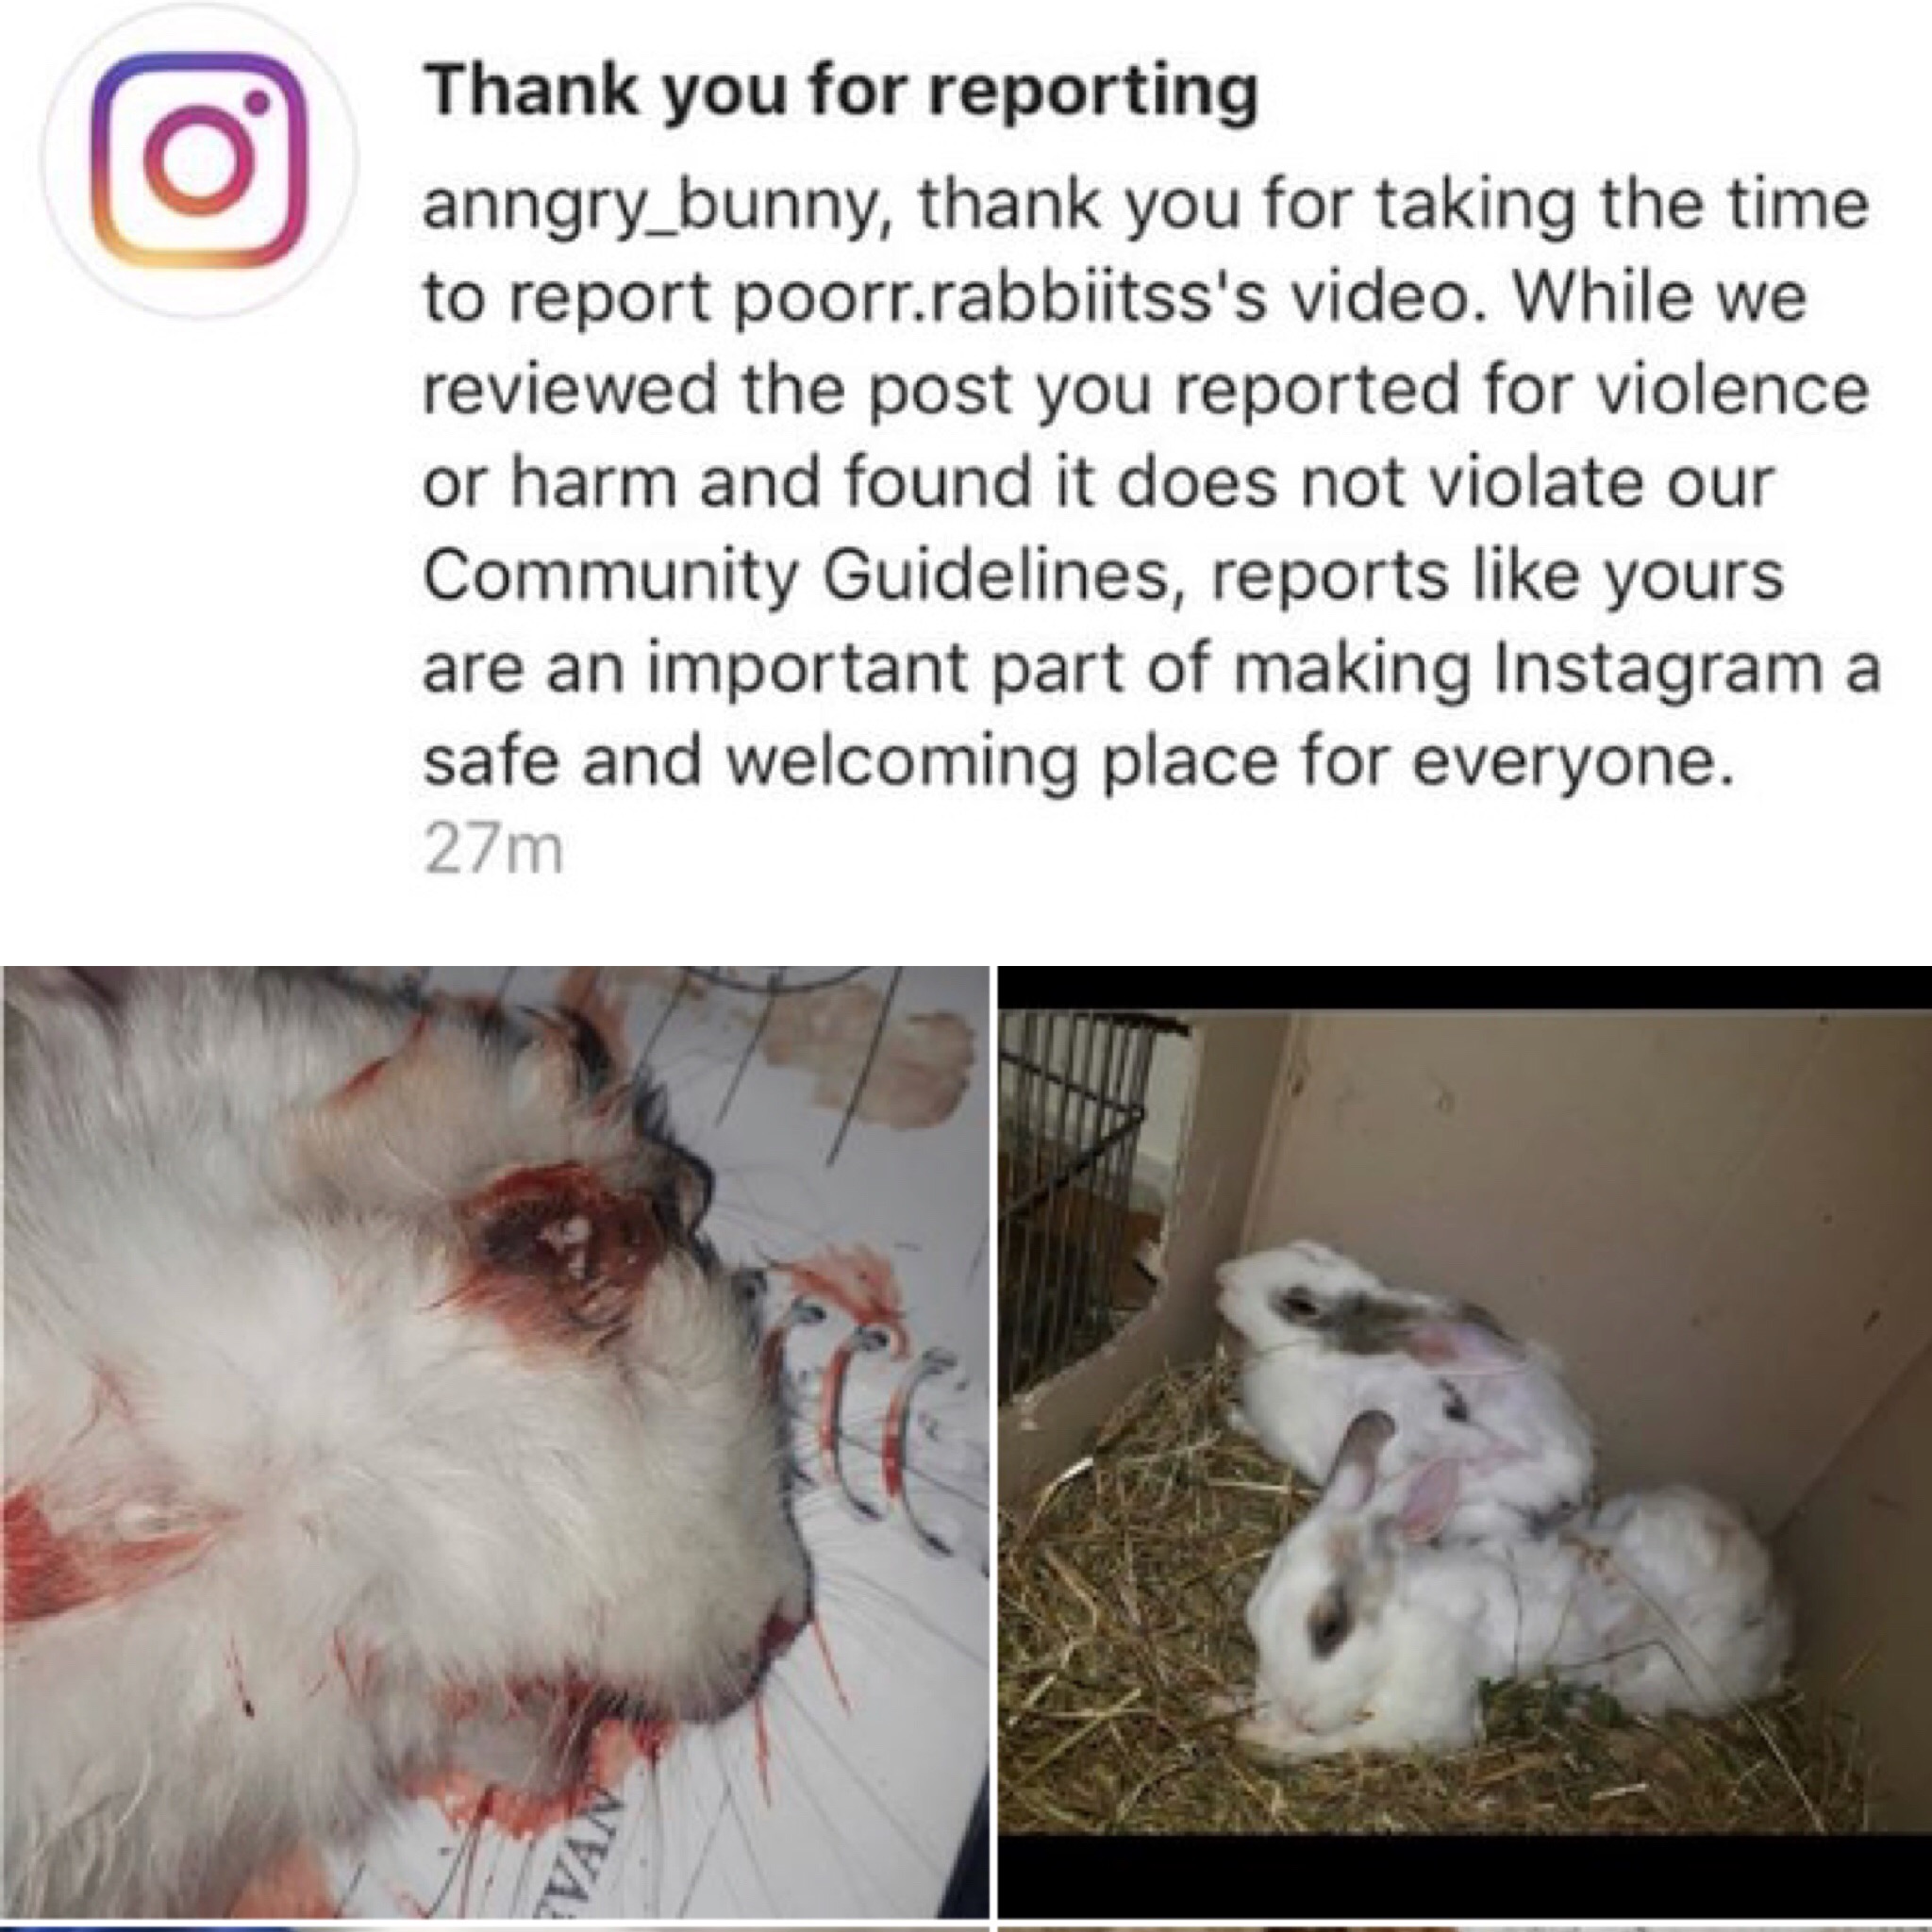 Demand Instagram Change Its Rules Against Animal Cruelty